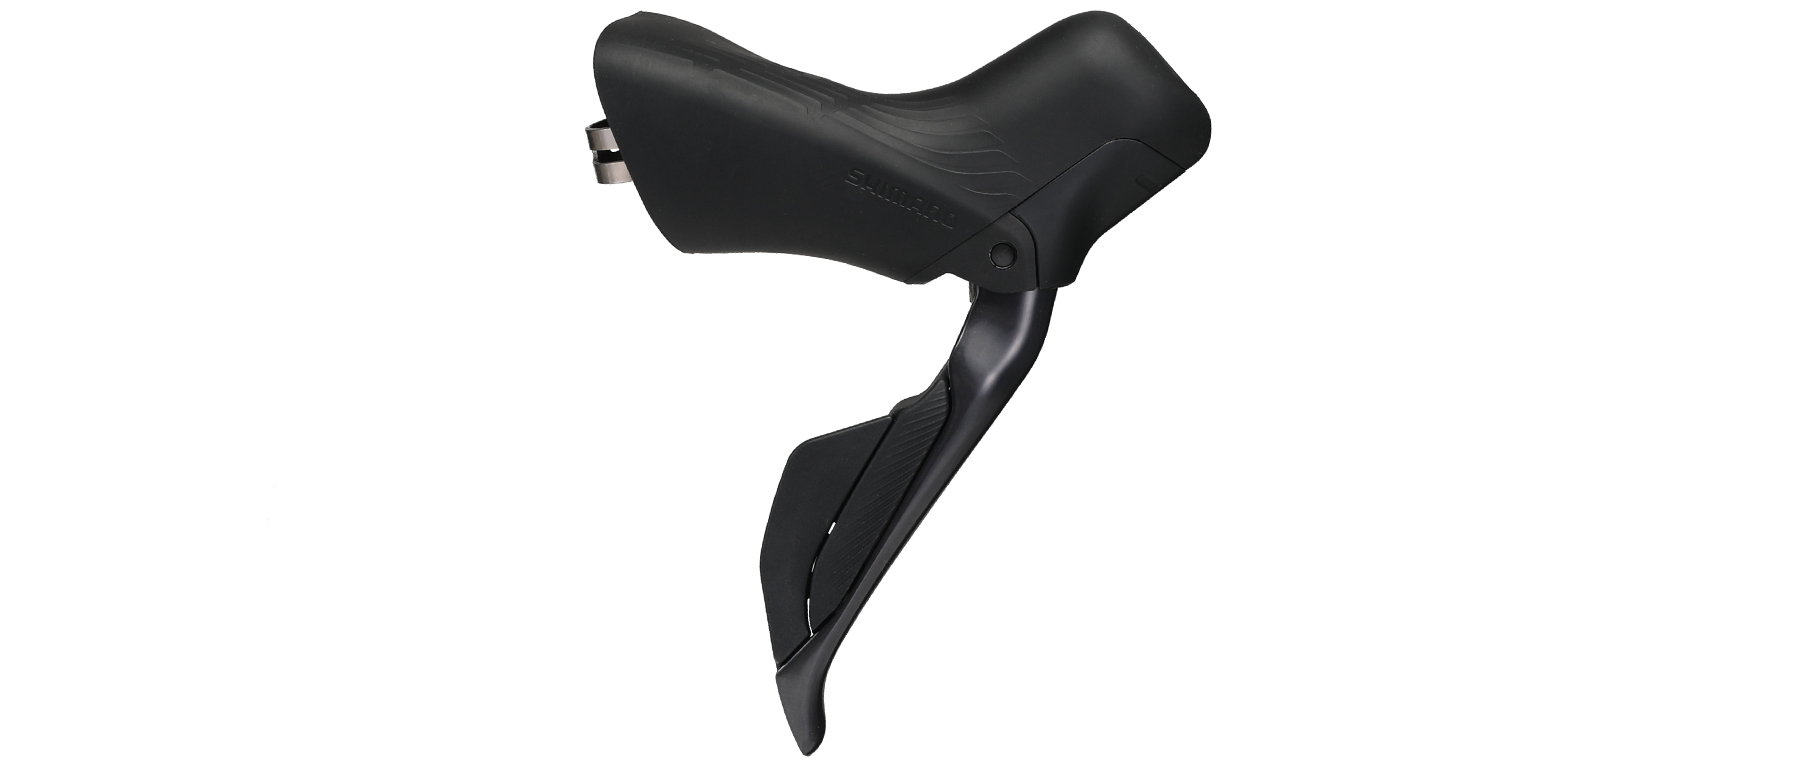 Shimano Ultegra ST-R8170 Dual Control Lever with Caliper